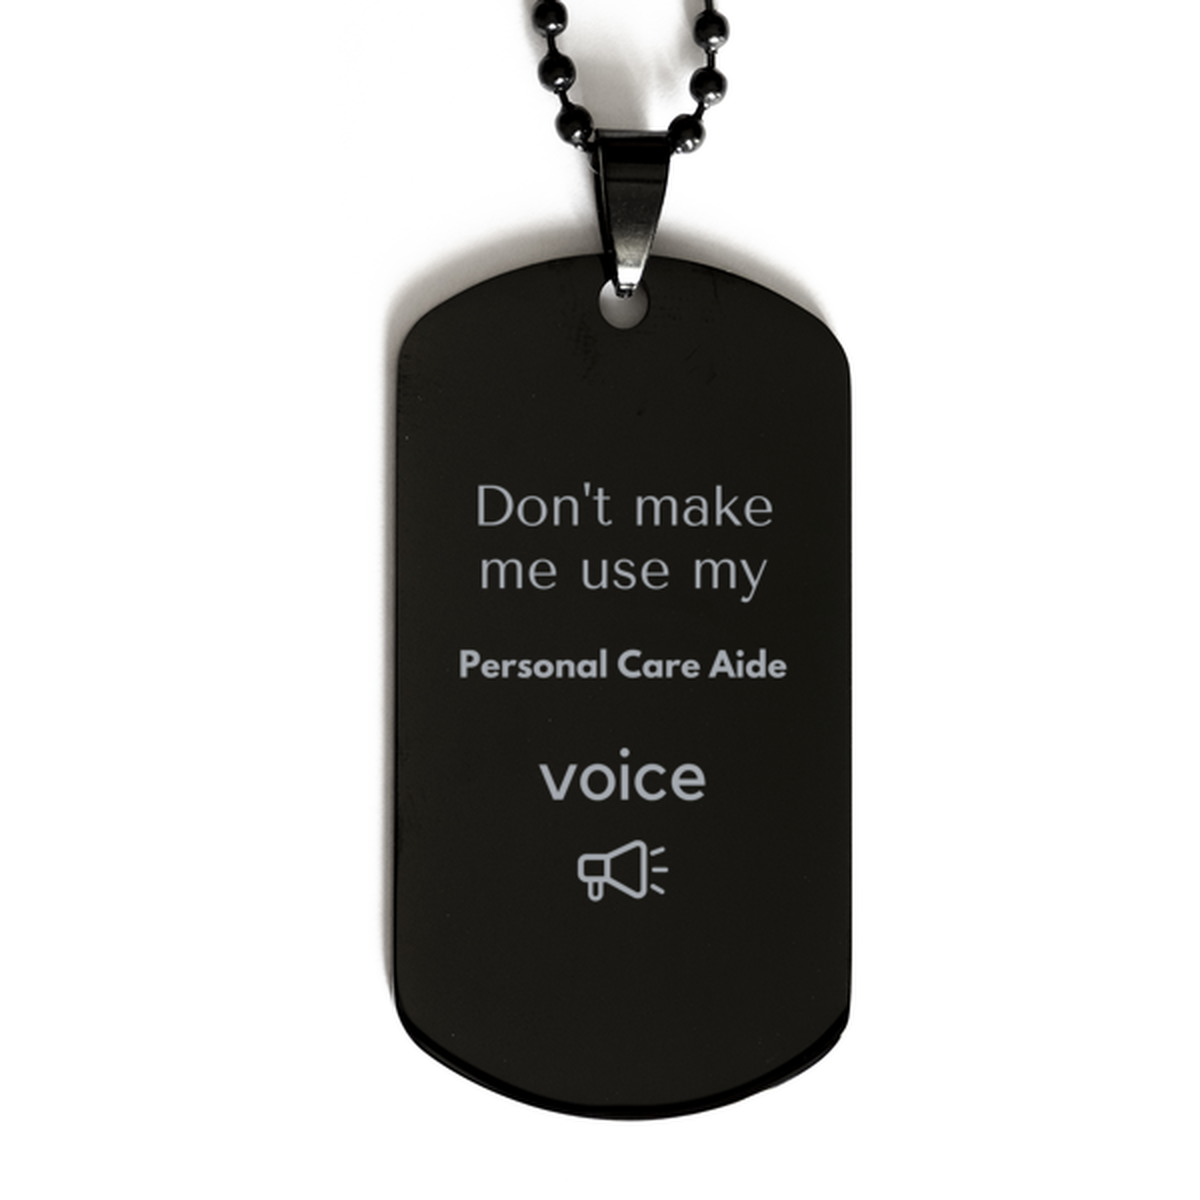 Don't make me use my Personal Care Aide voice, Sarcasm Personal Care Aide Gifts, Christmas Personal Care Aide Black Dog Tag Birthday Unique Gifts For Personal Care Aide Coworkers, Men, Women, Colleague, Friends